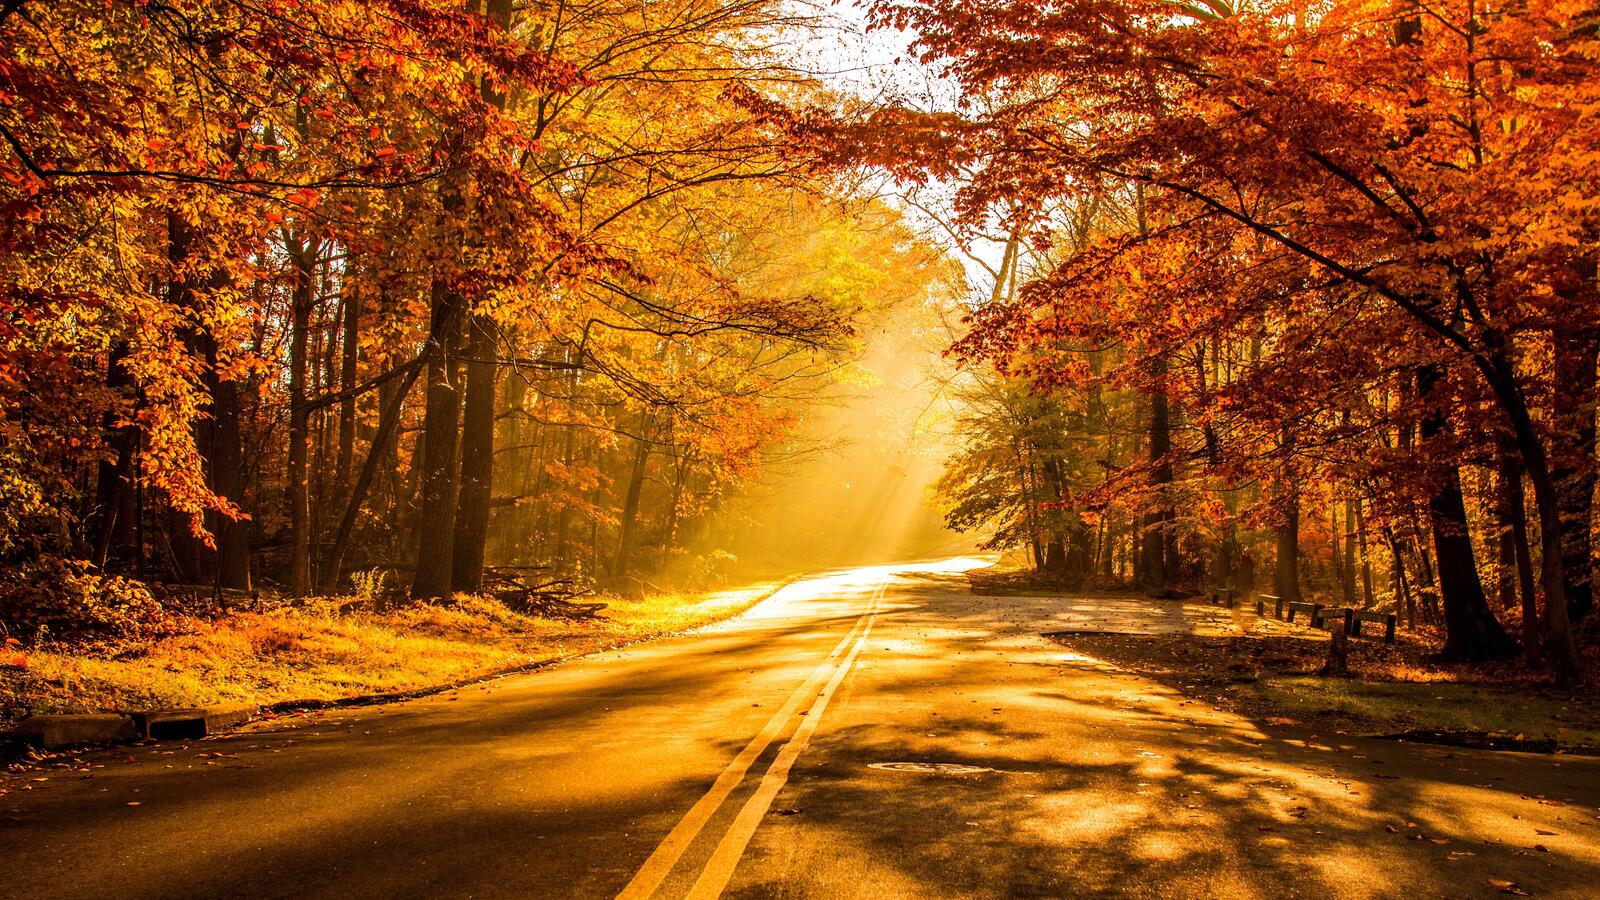 Free photo Asphalt road along an autumn forest with sunshine